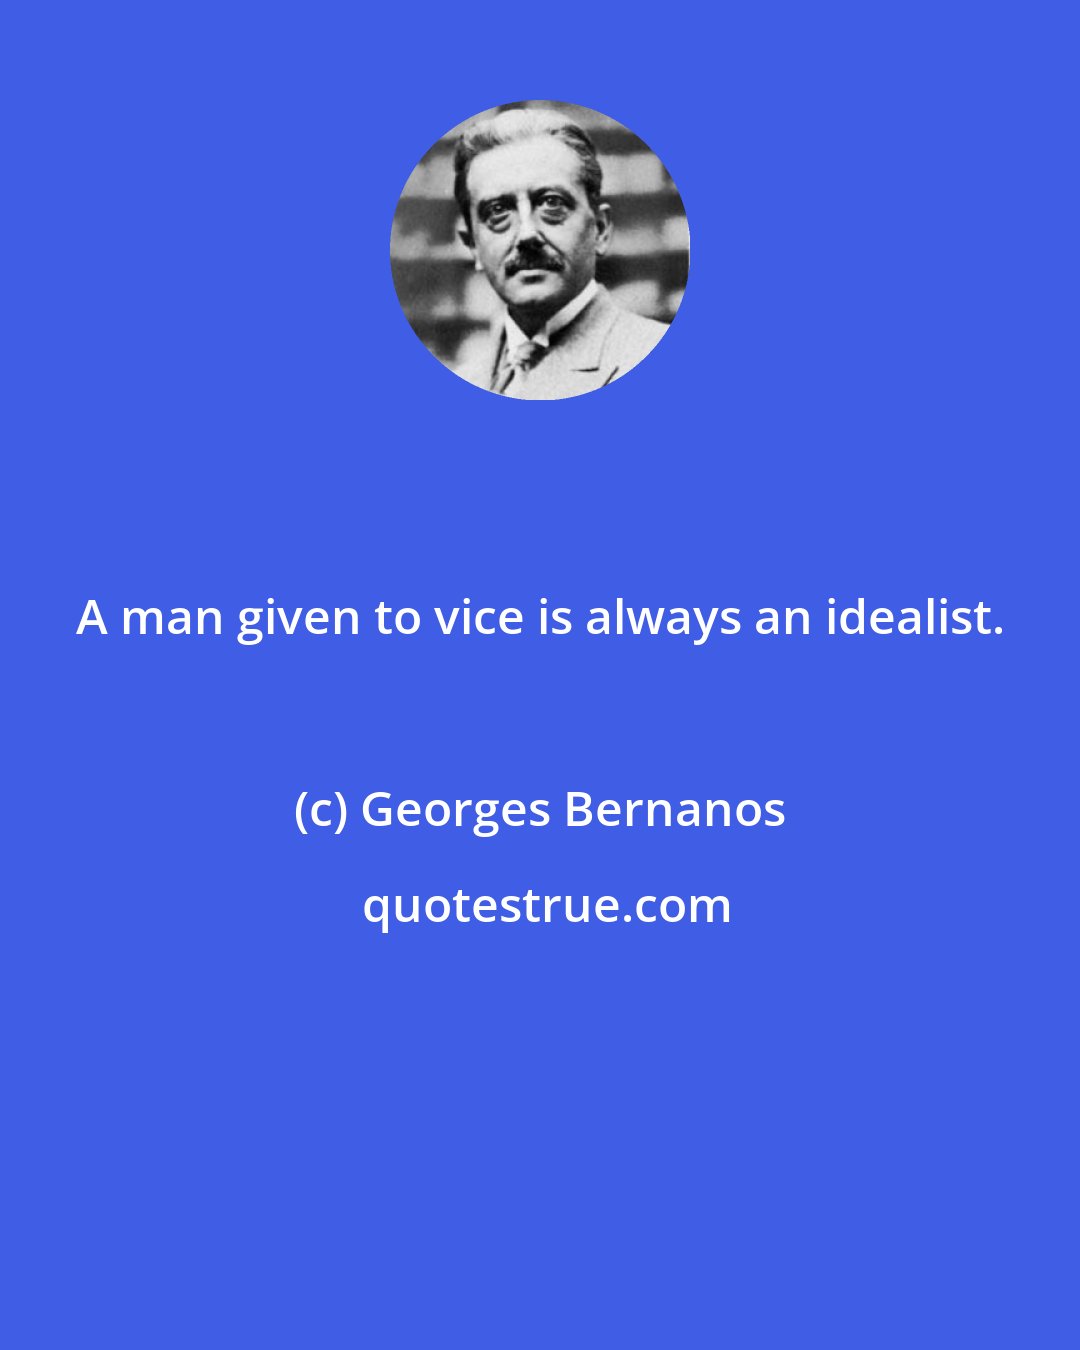 Georges Bernanos: A man given to vice is always an idealist.